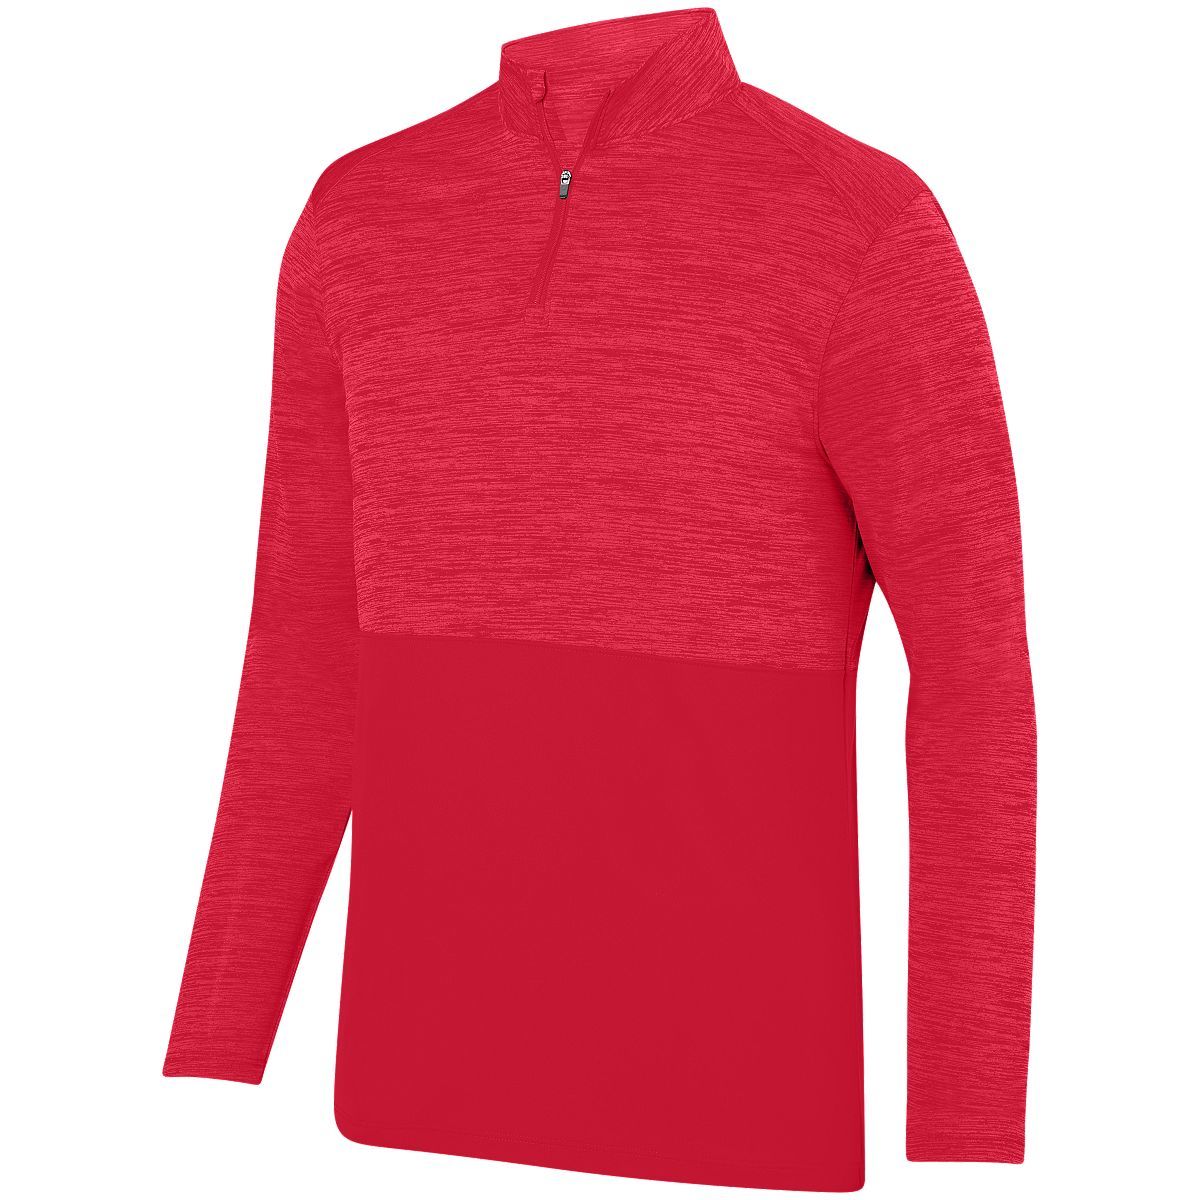 Augusta Sportswear Shadow Tonal Heather 1/4 Zip Pullover in Red  -Part of the Adult, Adult-Pullover, Augusta-Products, Outerwear, Tonal-Fleece-Collection product lines at KanaleyCreations.com